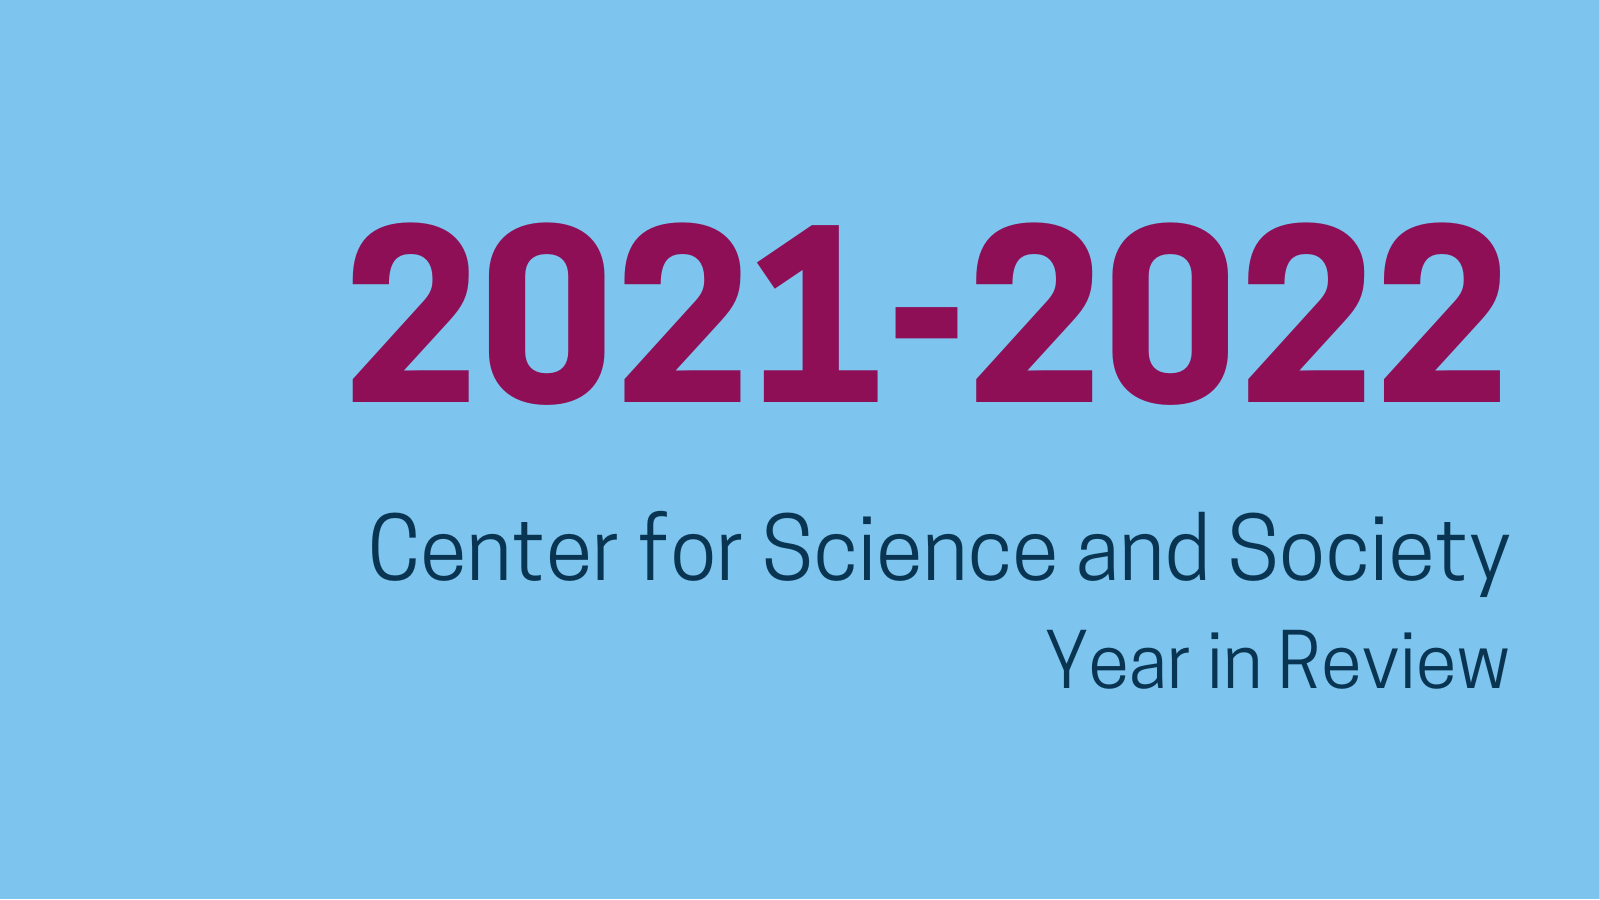 2021-2022 Center for Science and Society Year in Review